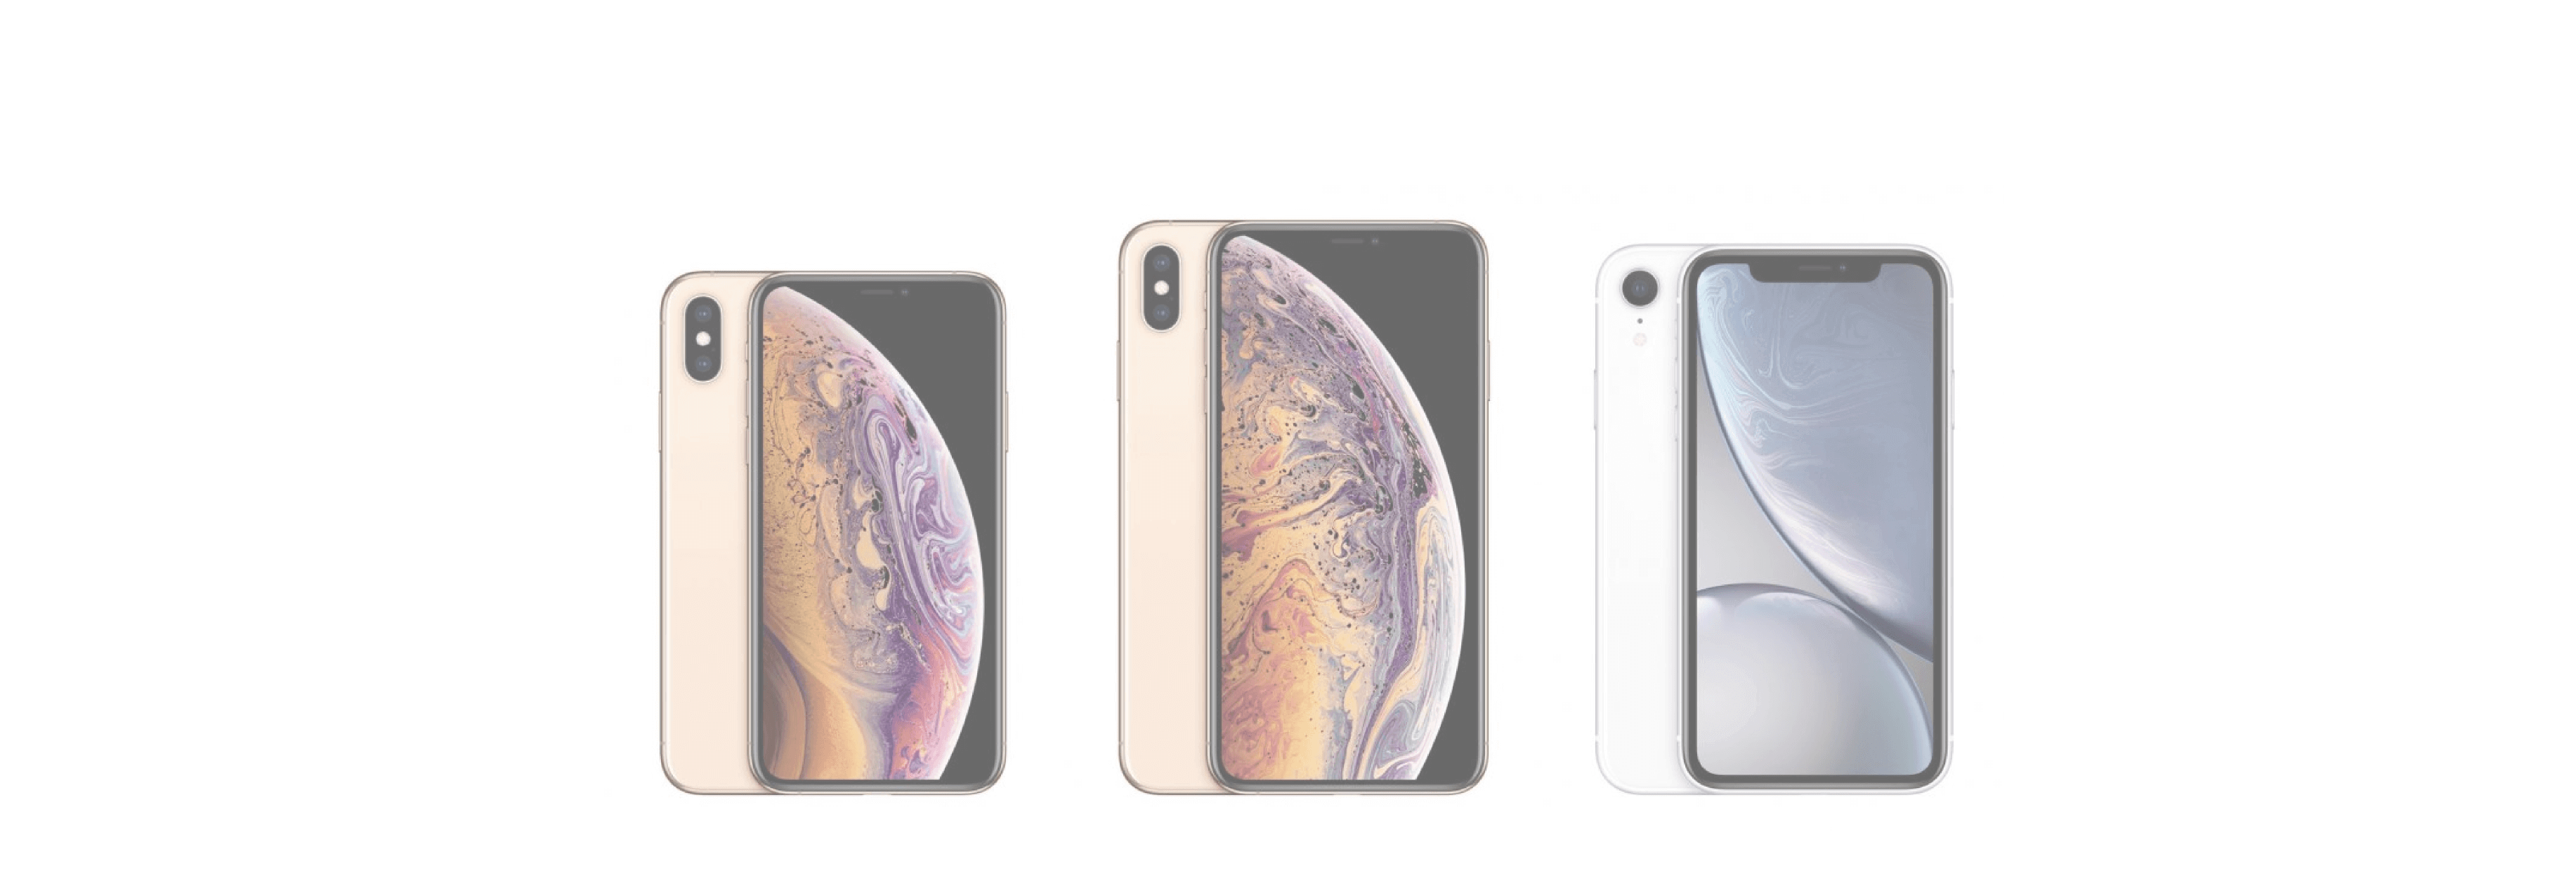 Will your old case fit the new iPhone XR,  iPhone XS, and iPhone XS Max?